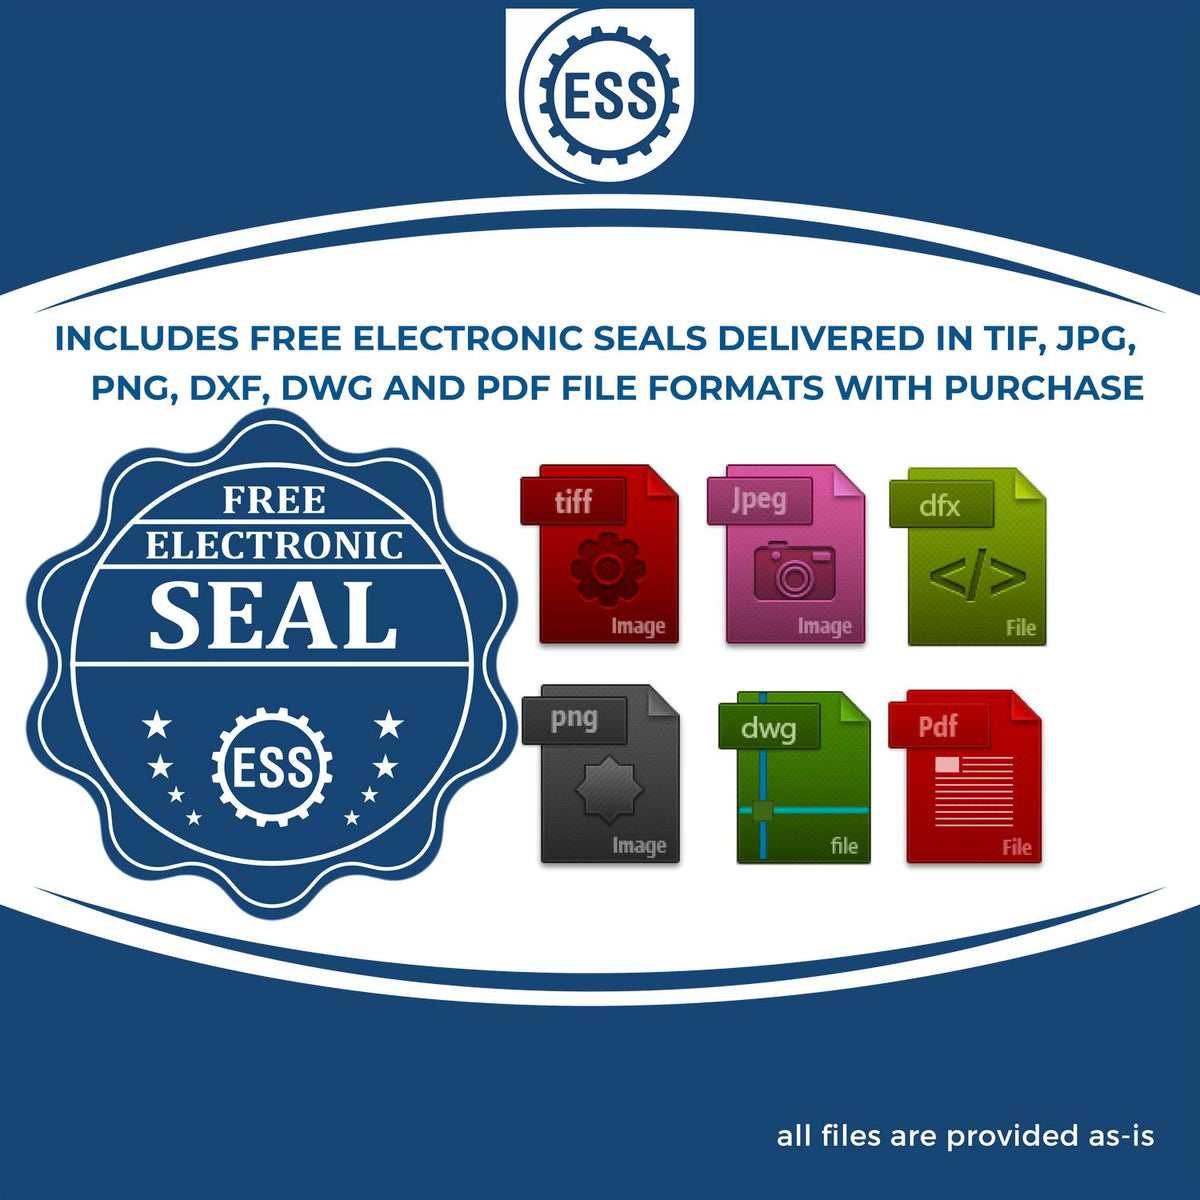 An infographic for the free electronic seal for the Hawaii Professional Geologist Seal Stamp illustrating the different file type icons such as DXF, DWG, TIF, JPG and PNG.